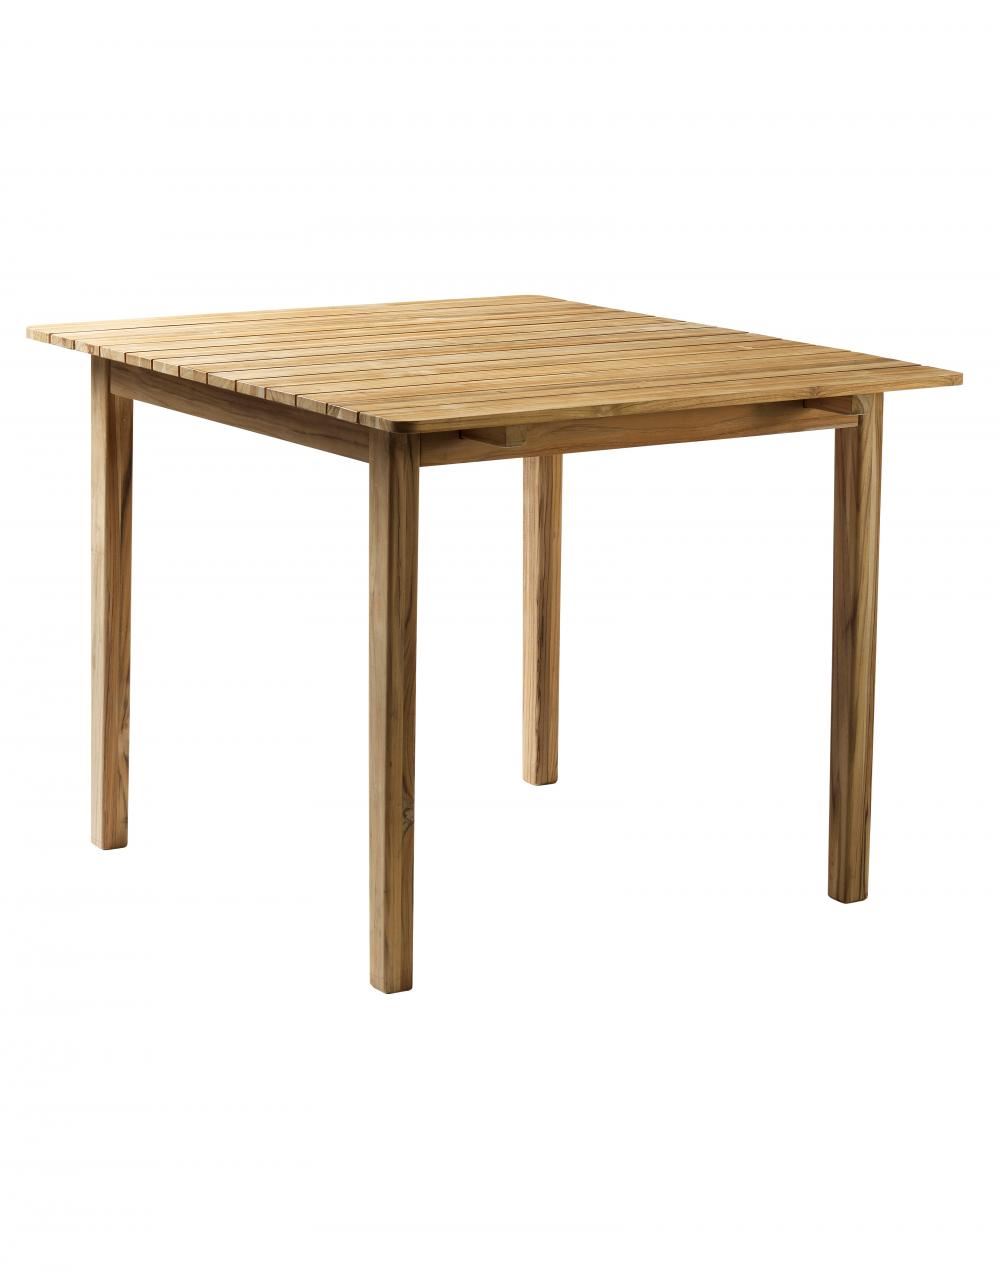 Fdb Mobler M3 Square Garden Table With Central Connector Leaf Light Wood Designer Furniture From Holloways Of Ludlow